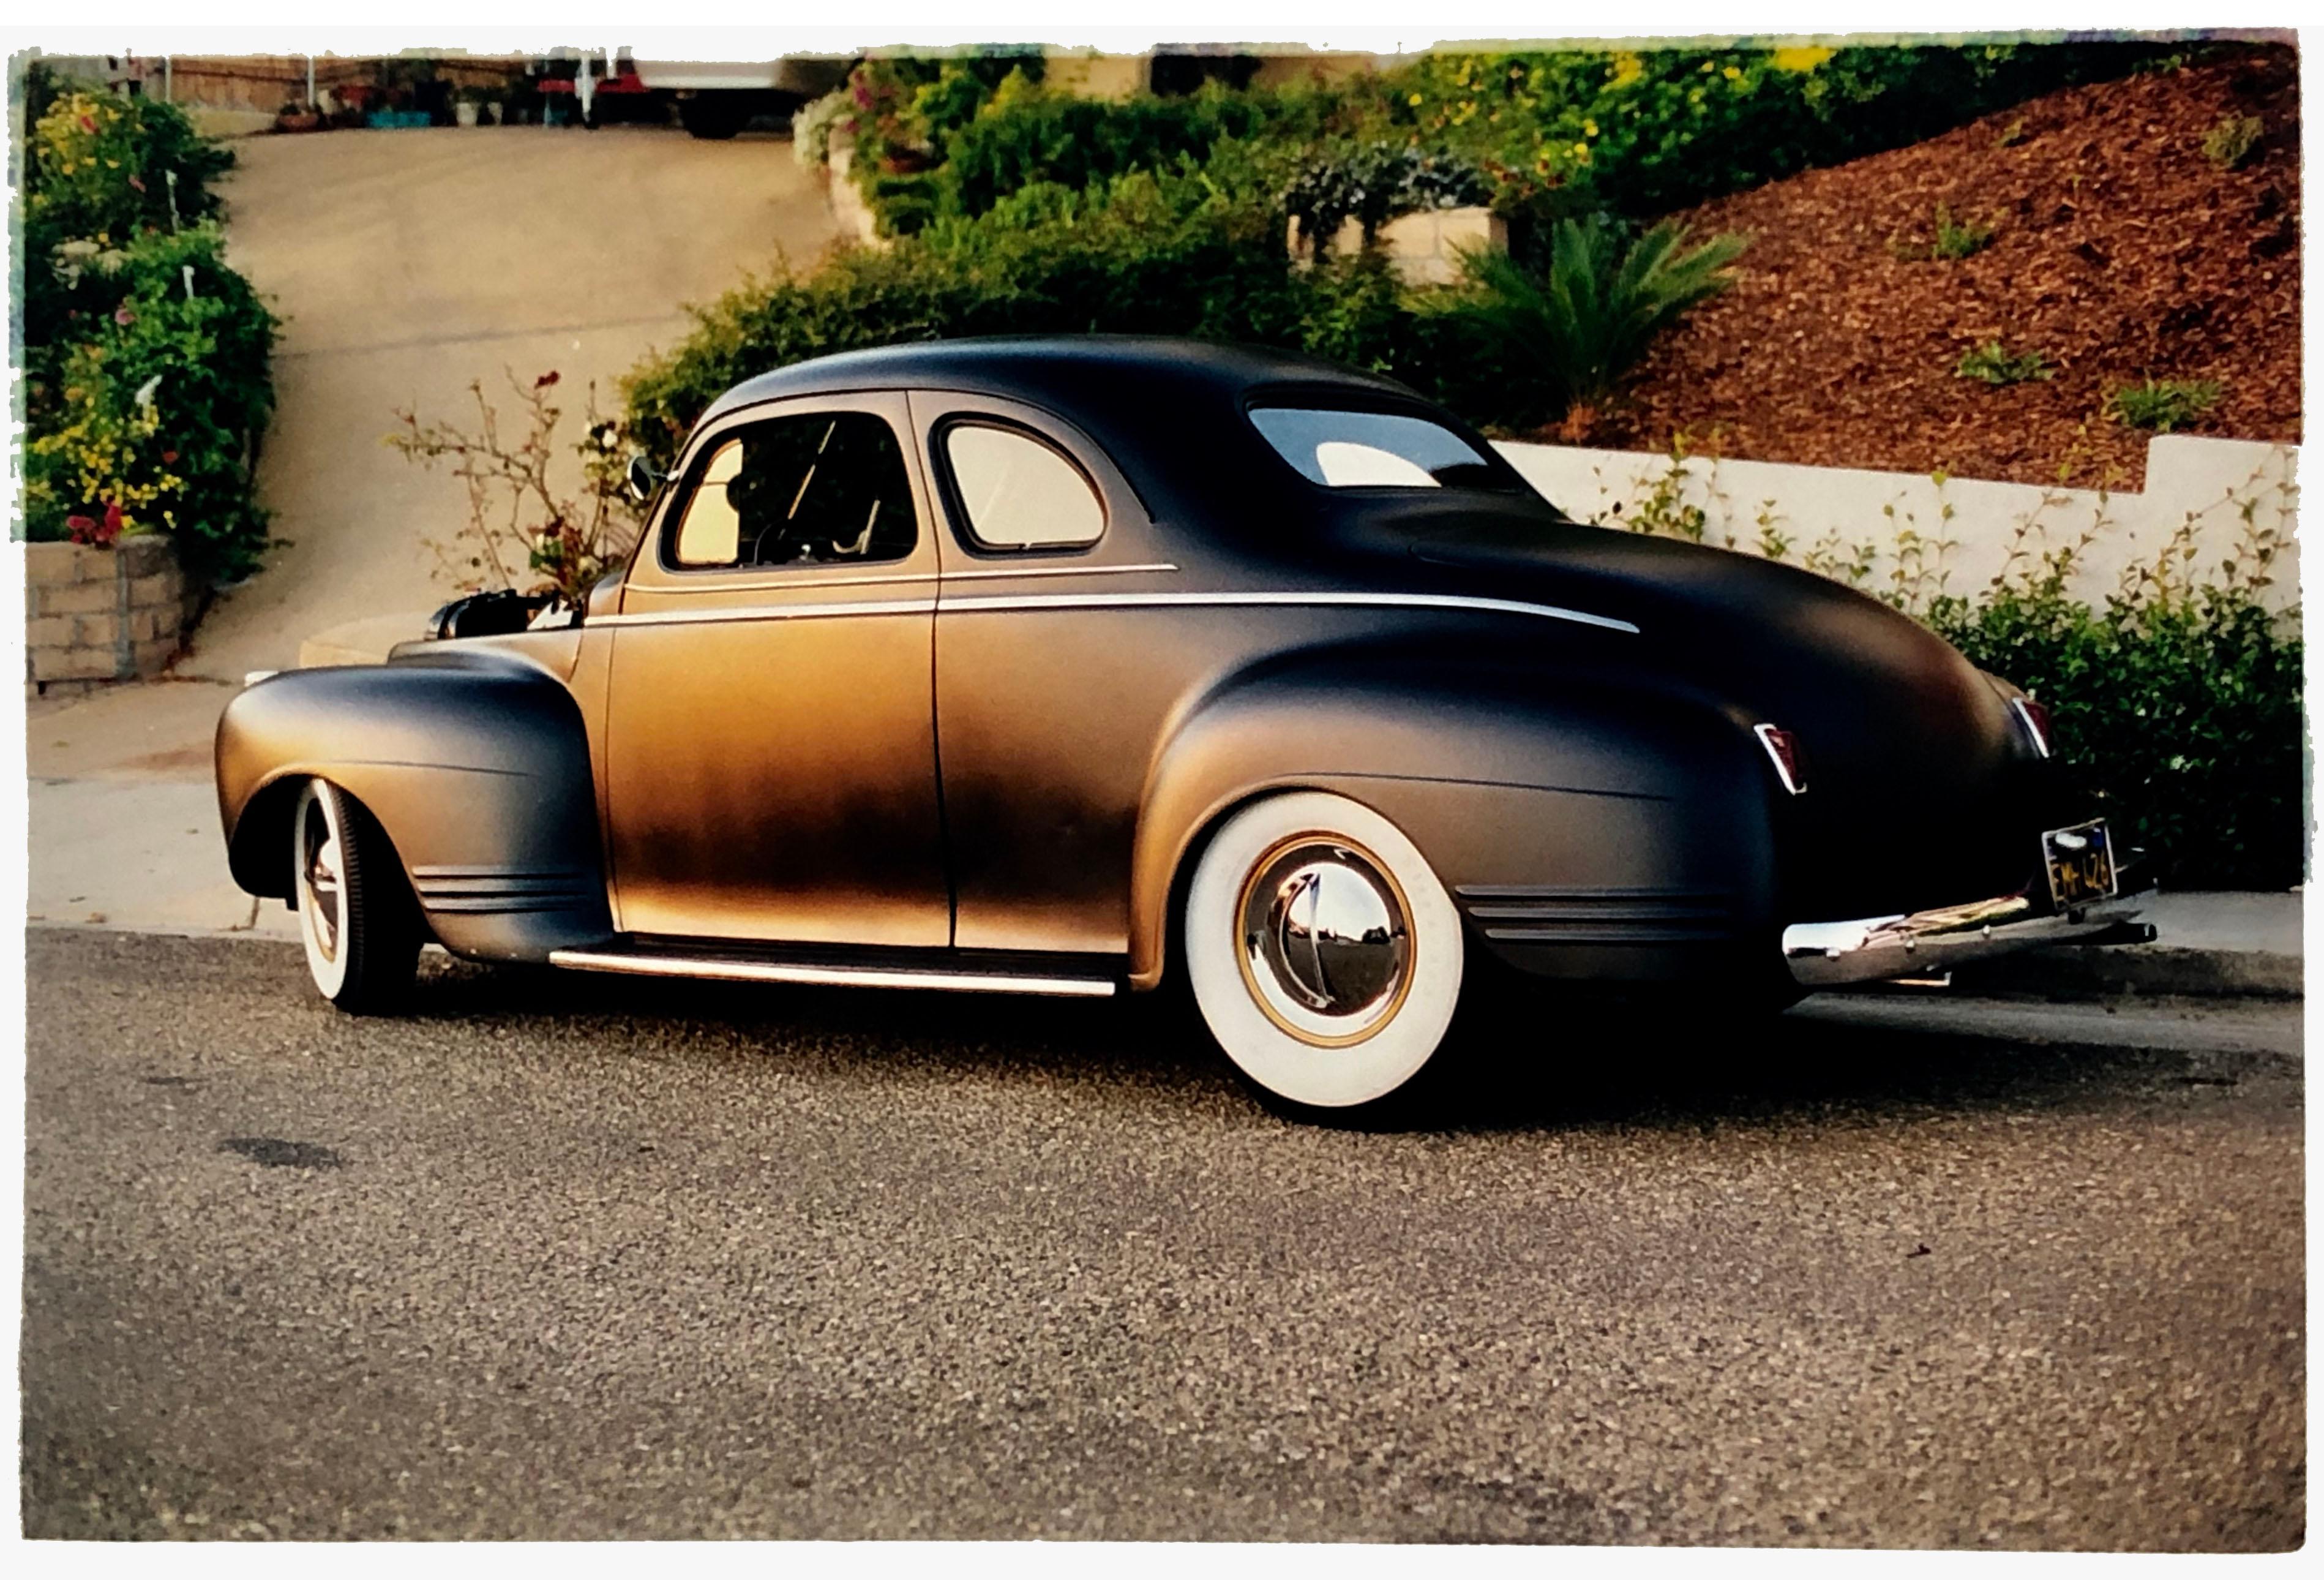 Richard Heeps Color Photograph - Shelley's '41 Plymouth, California - Dream in Color Series - Vintage Car Photo